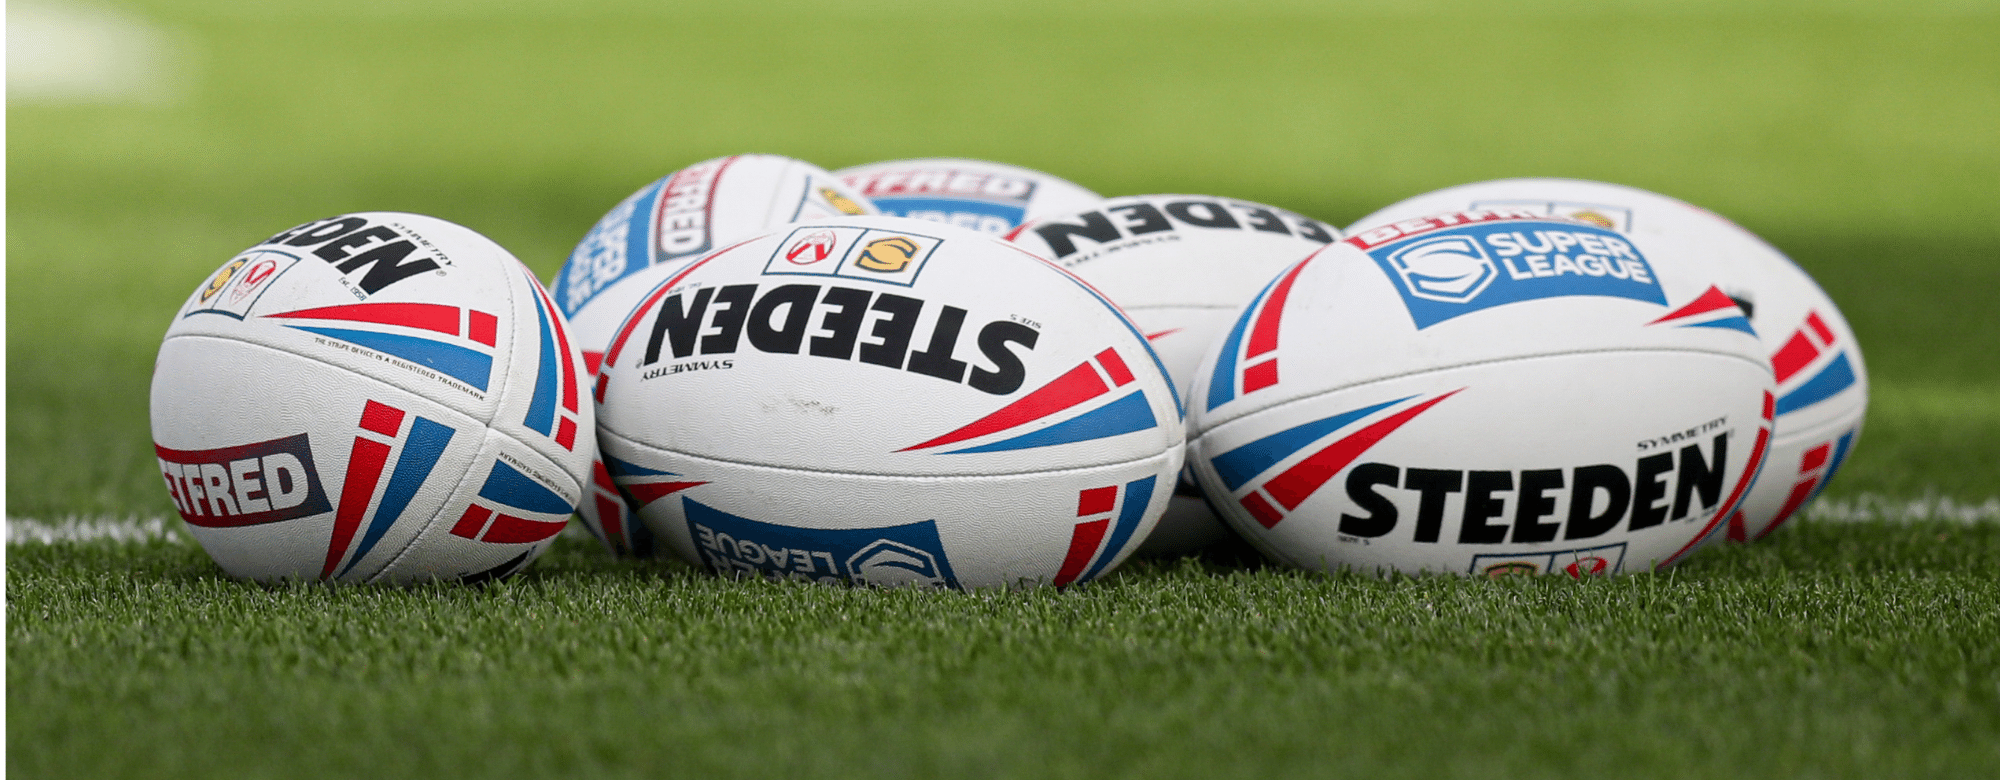 Hull To Face Wigan Or Warrington In Play-Off Eliminator